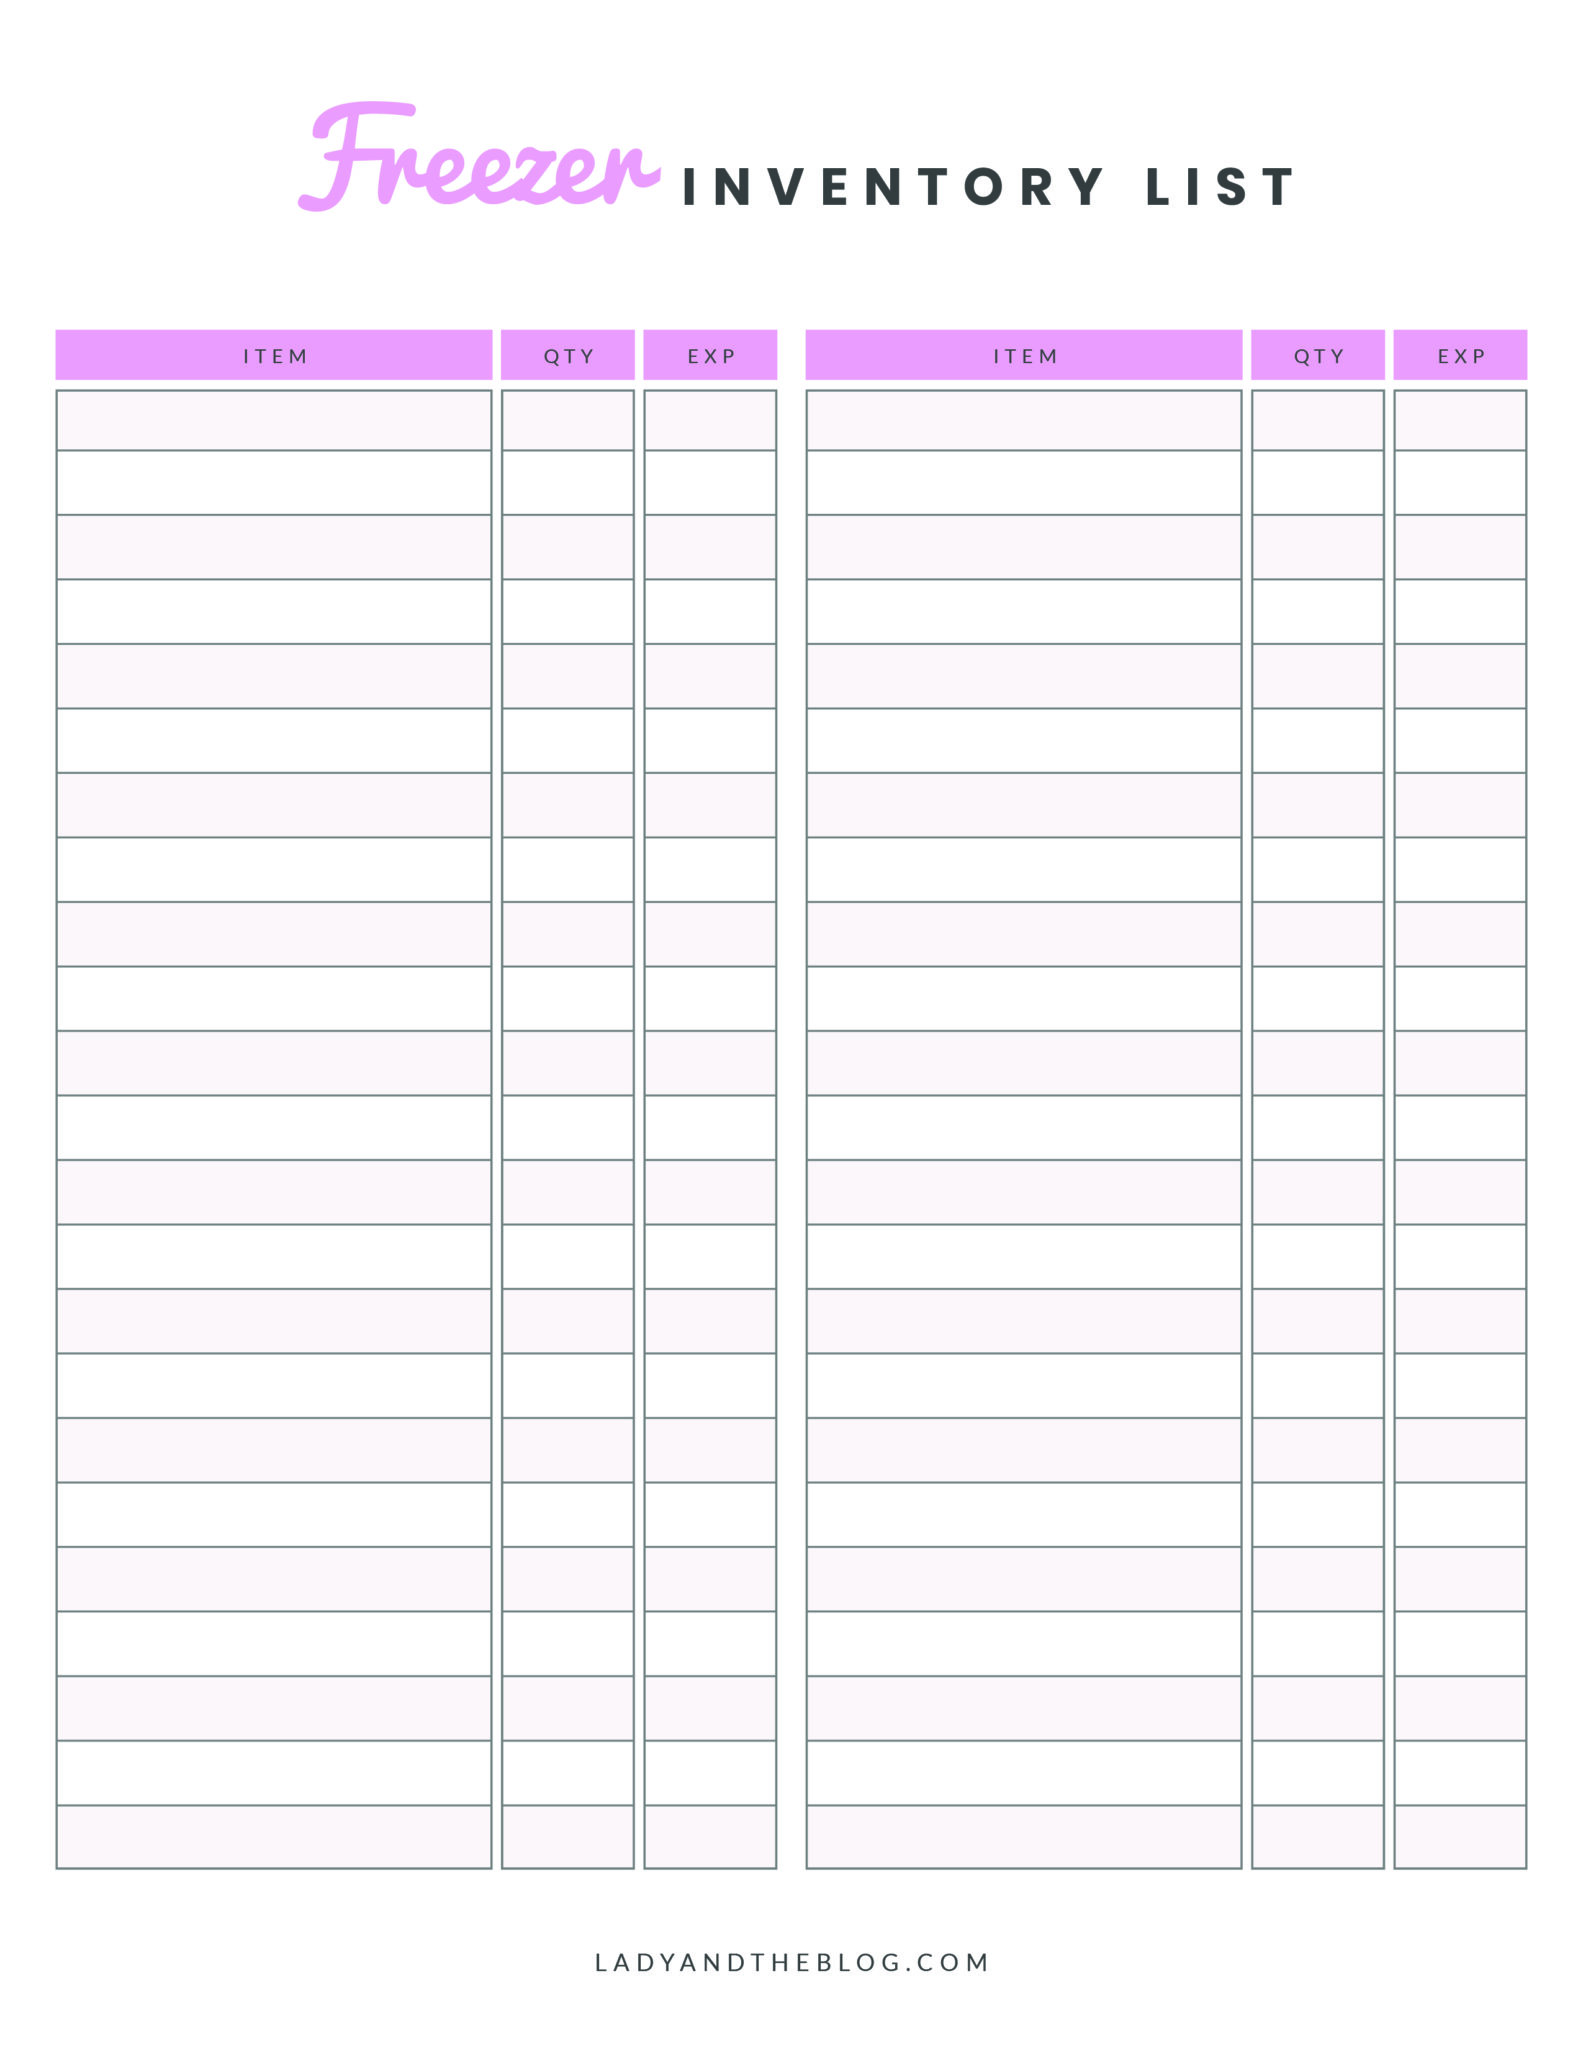 free-freezer-inventory-printable-the-best-way-to-inventory-your-kitchen